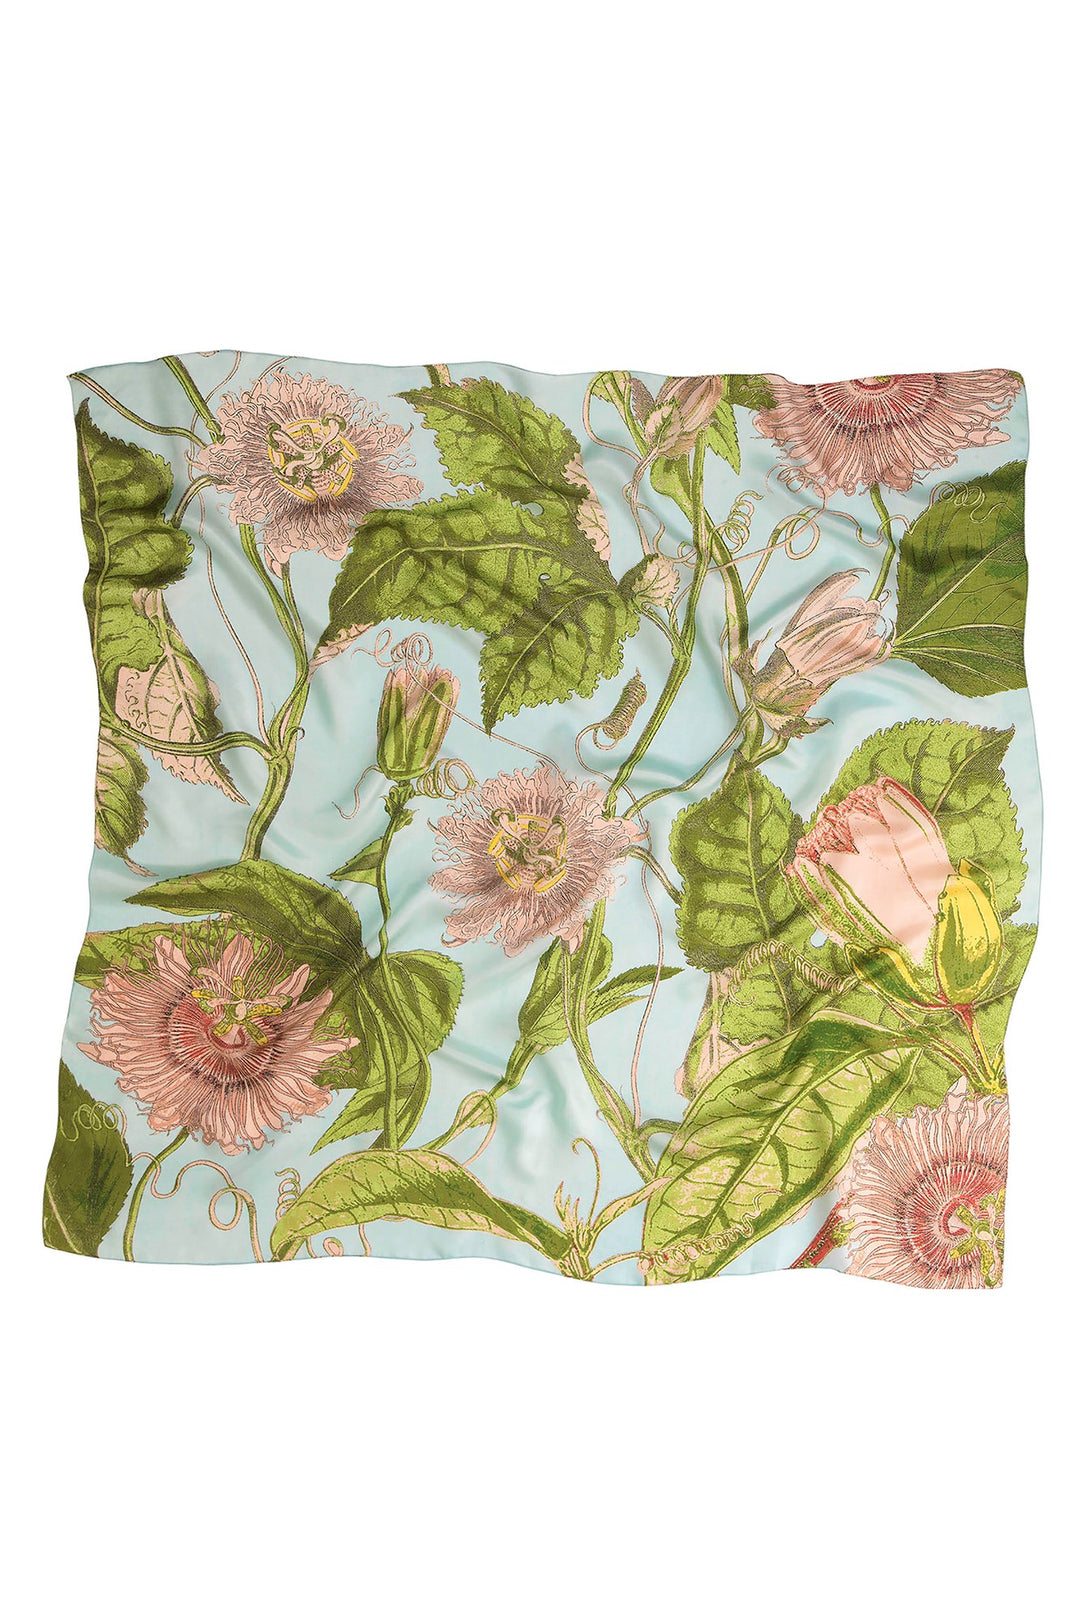 KEW Passion Flower Sky Silk Square Scarf - One Hundred Stars